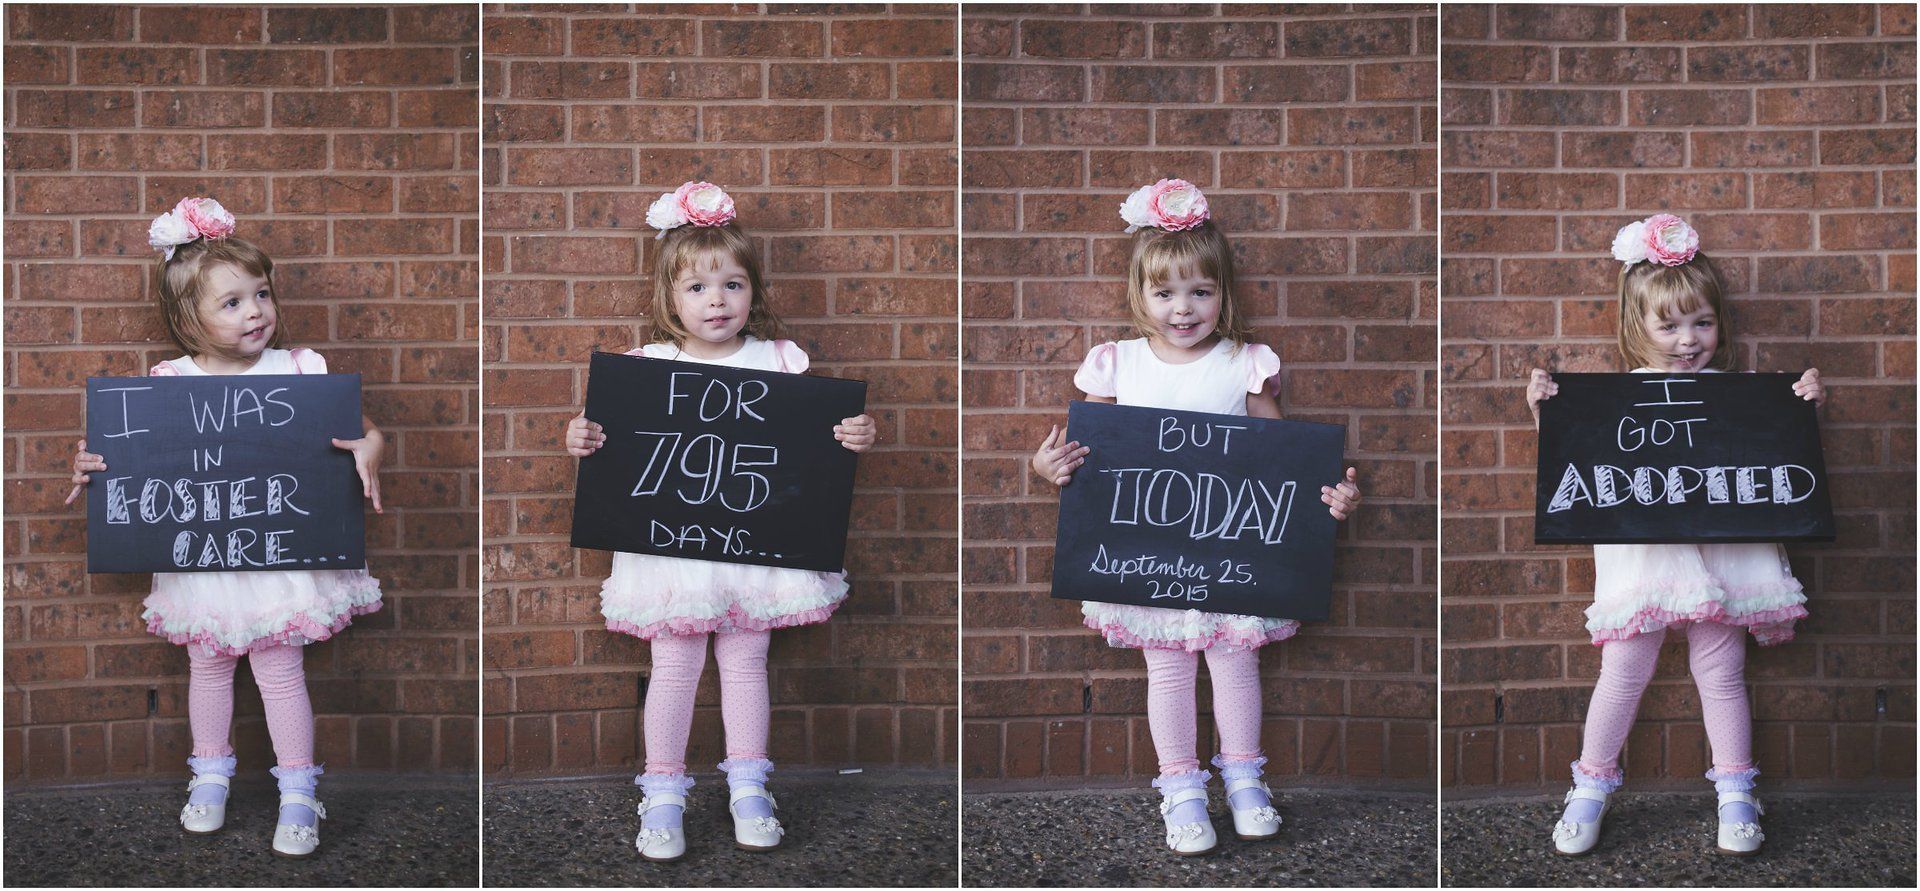 Young girl celebrates her adoption day, ending her days in foster care.